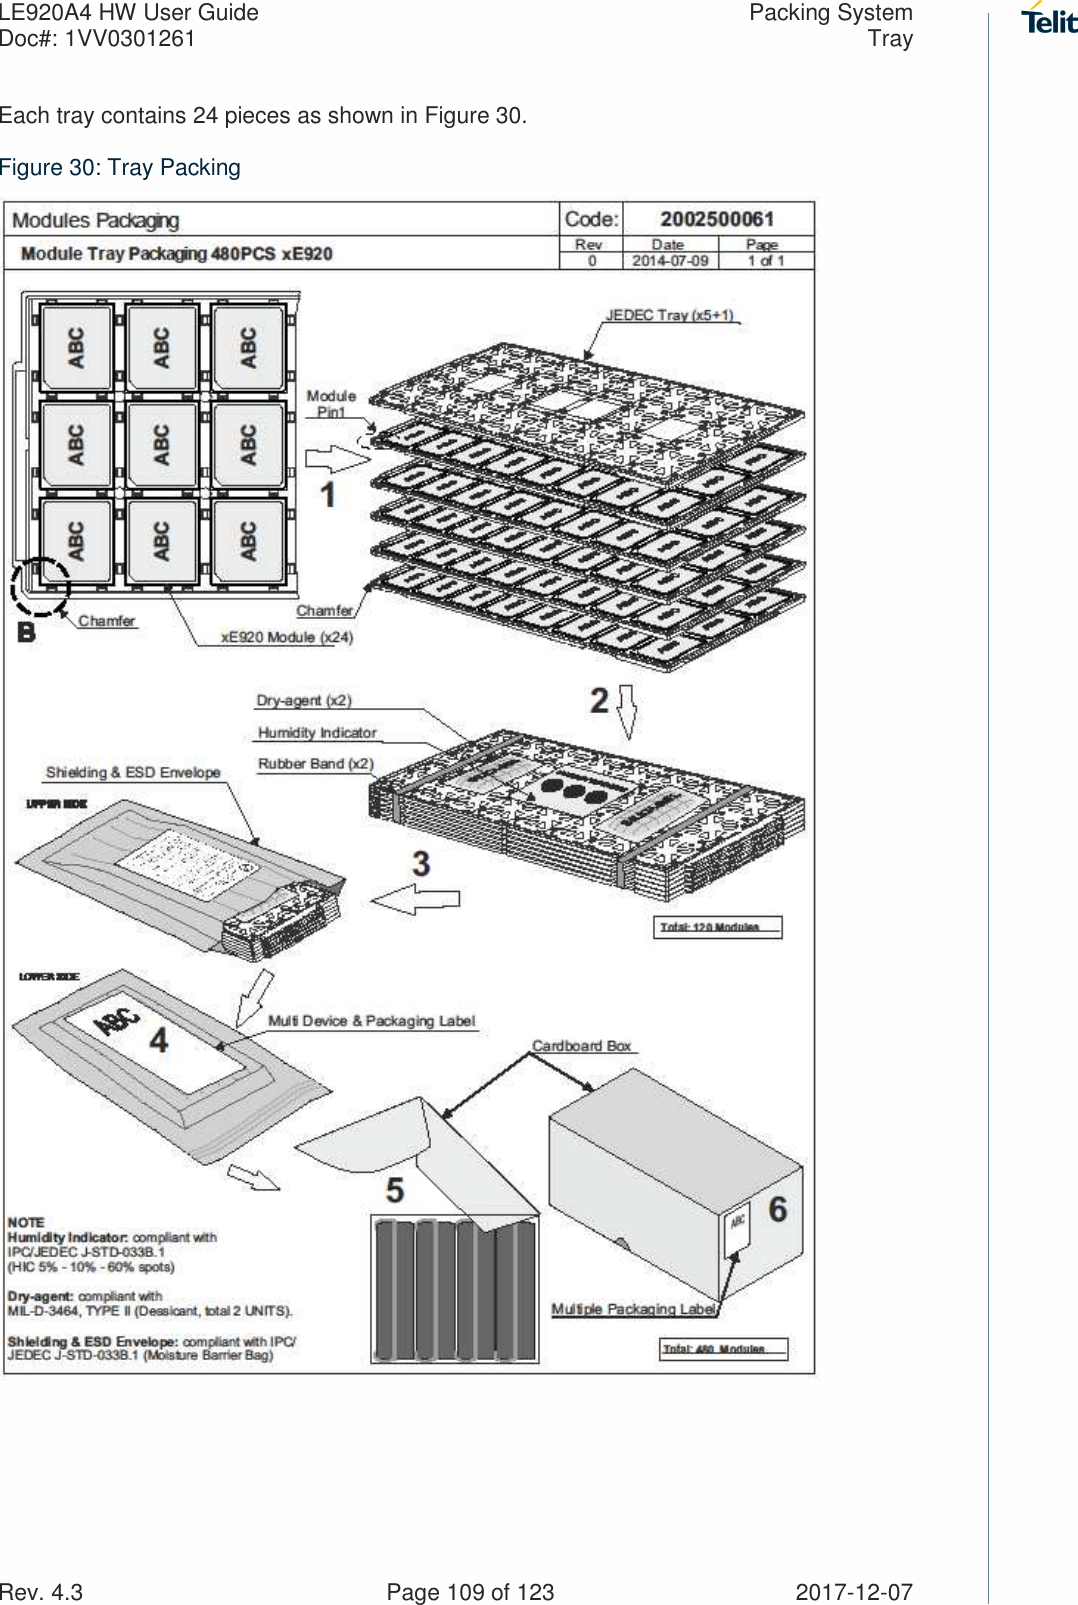 LE920A4 HW User Guide  Packing System Doc#: 1VV0301261  Tray Rev. 4.3    Page 109 of 123  2017-12-07 Each tray contains 24 pieces as shown in Figure 30. Figure 30: Tray Packing   